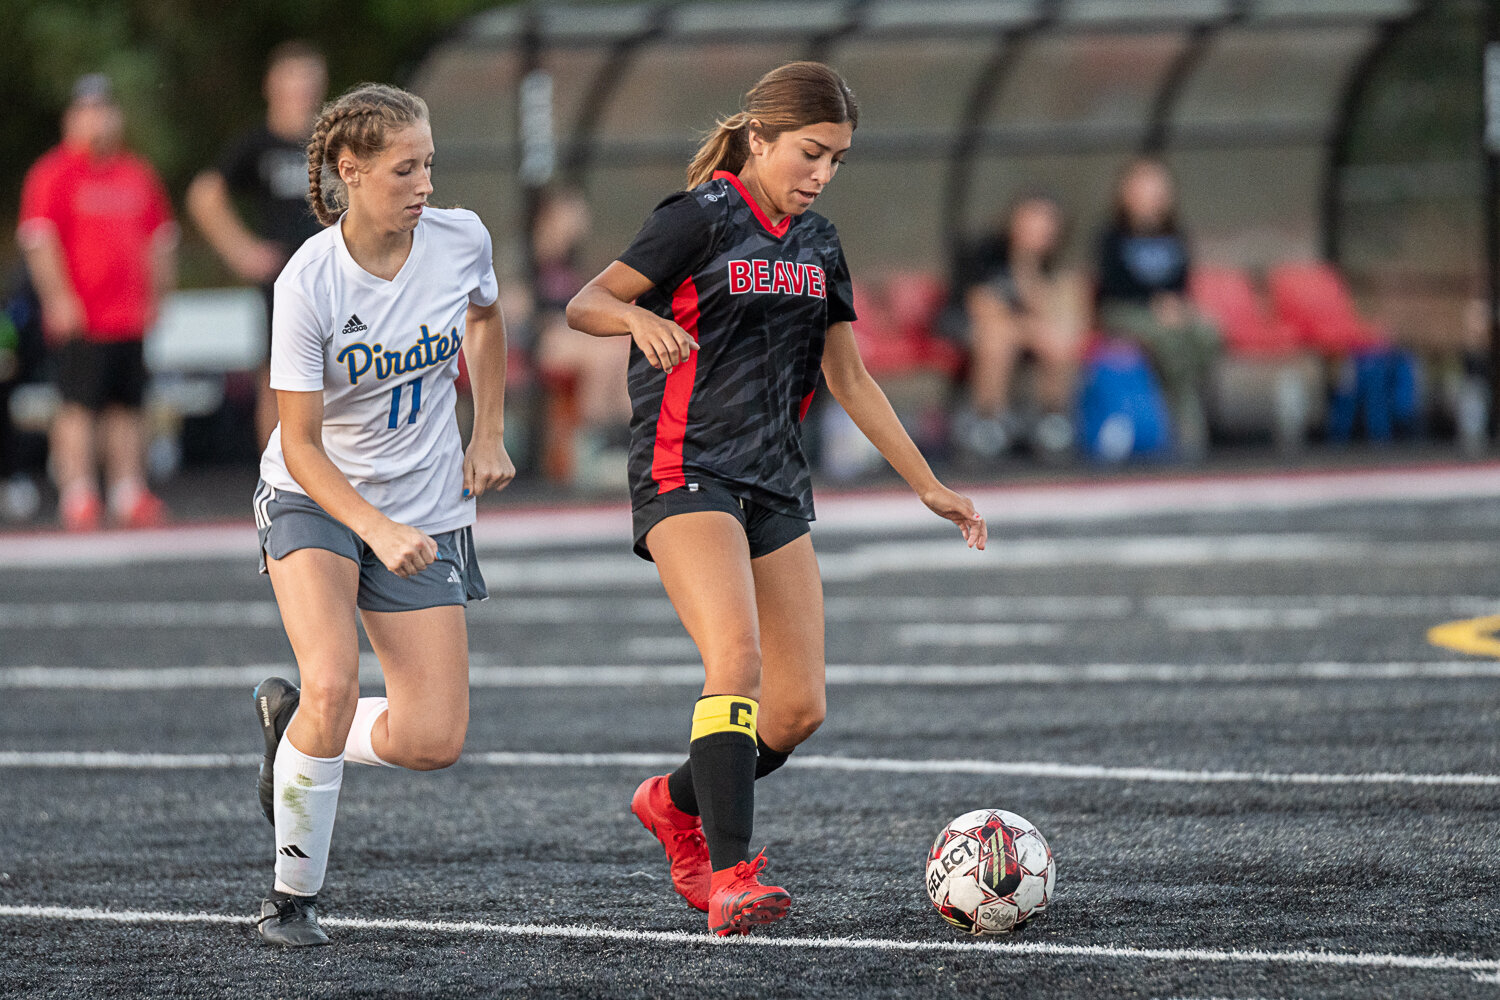 Tenino's Paisley Garcia tries to evade Adna's Bailey Naillon during the Beavers' 0-0 tie against the Pirates on Sept. 14